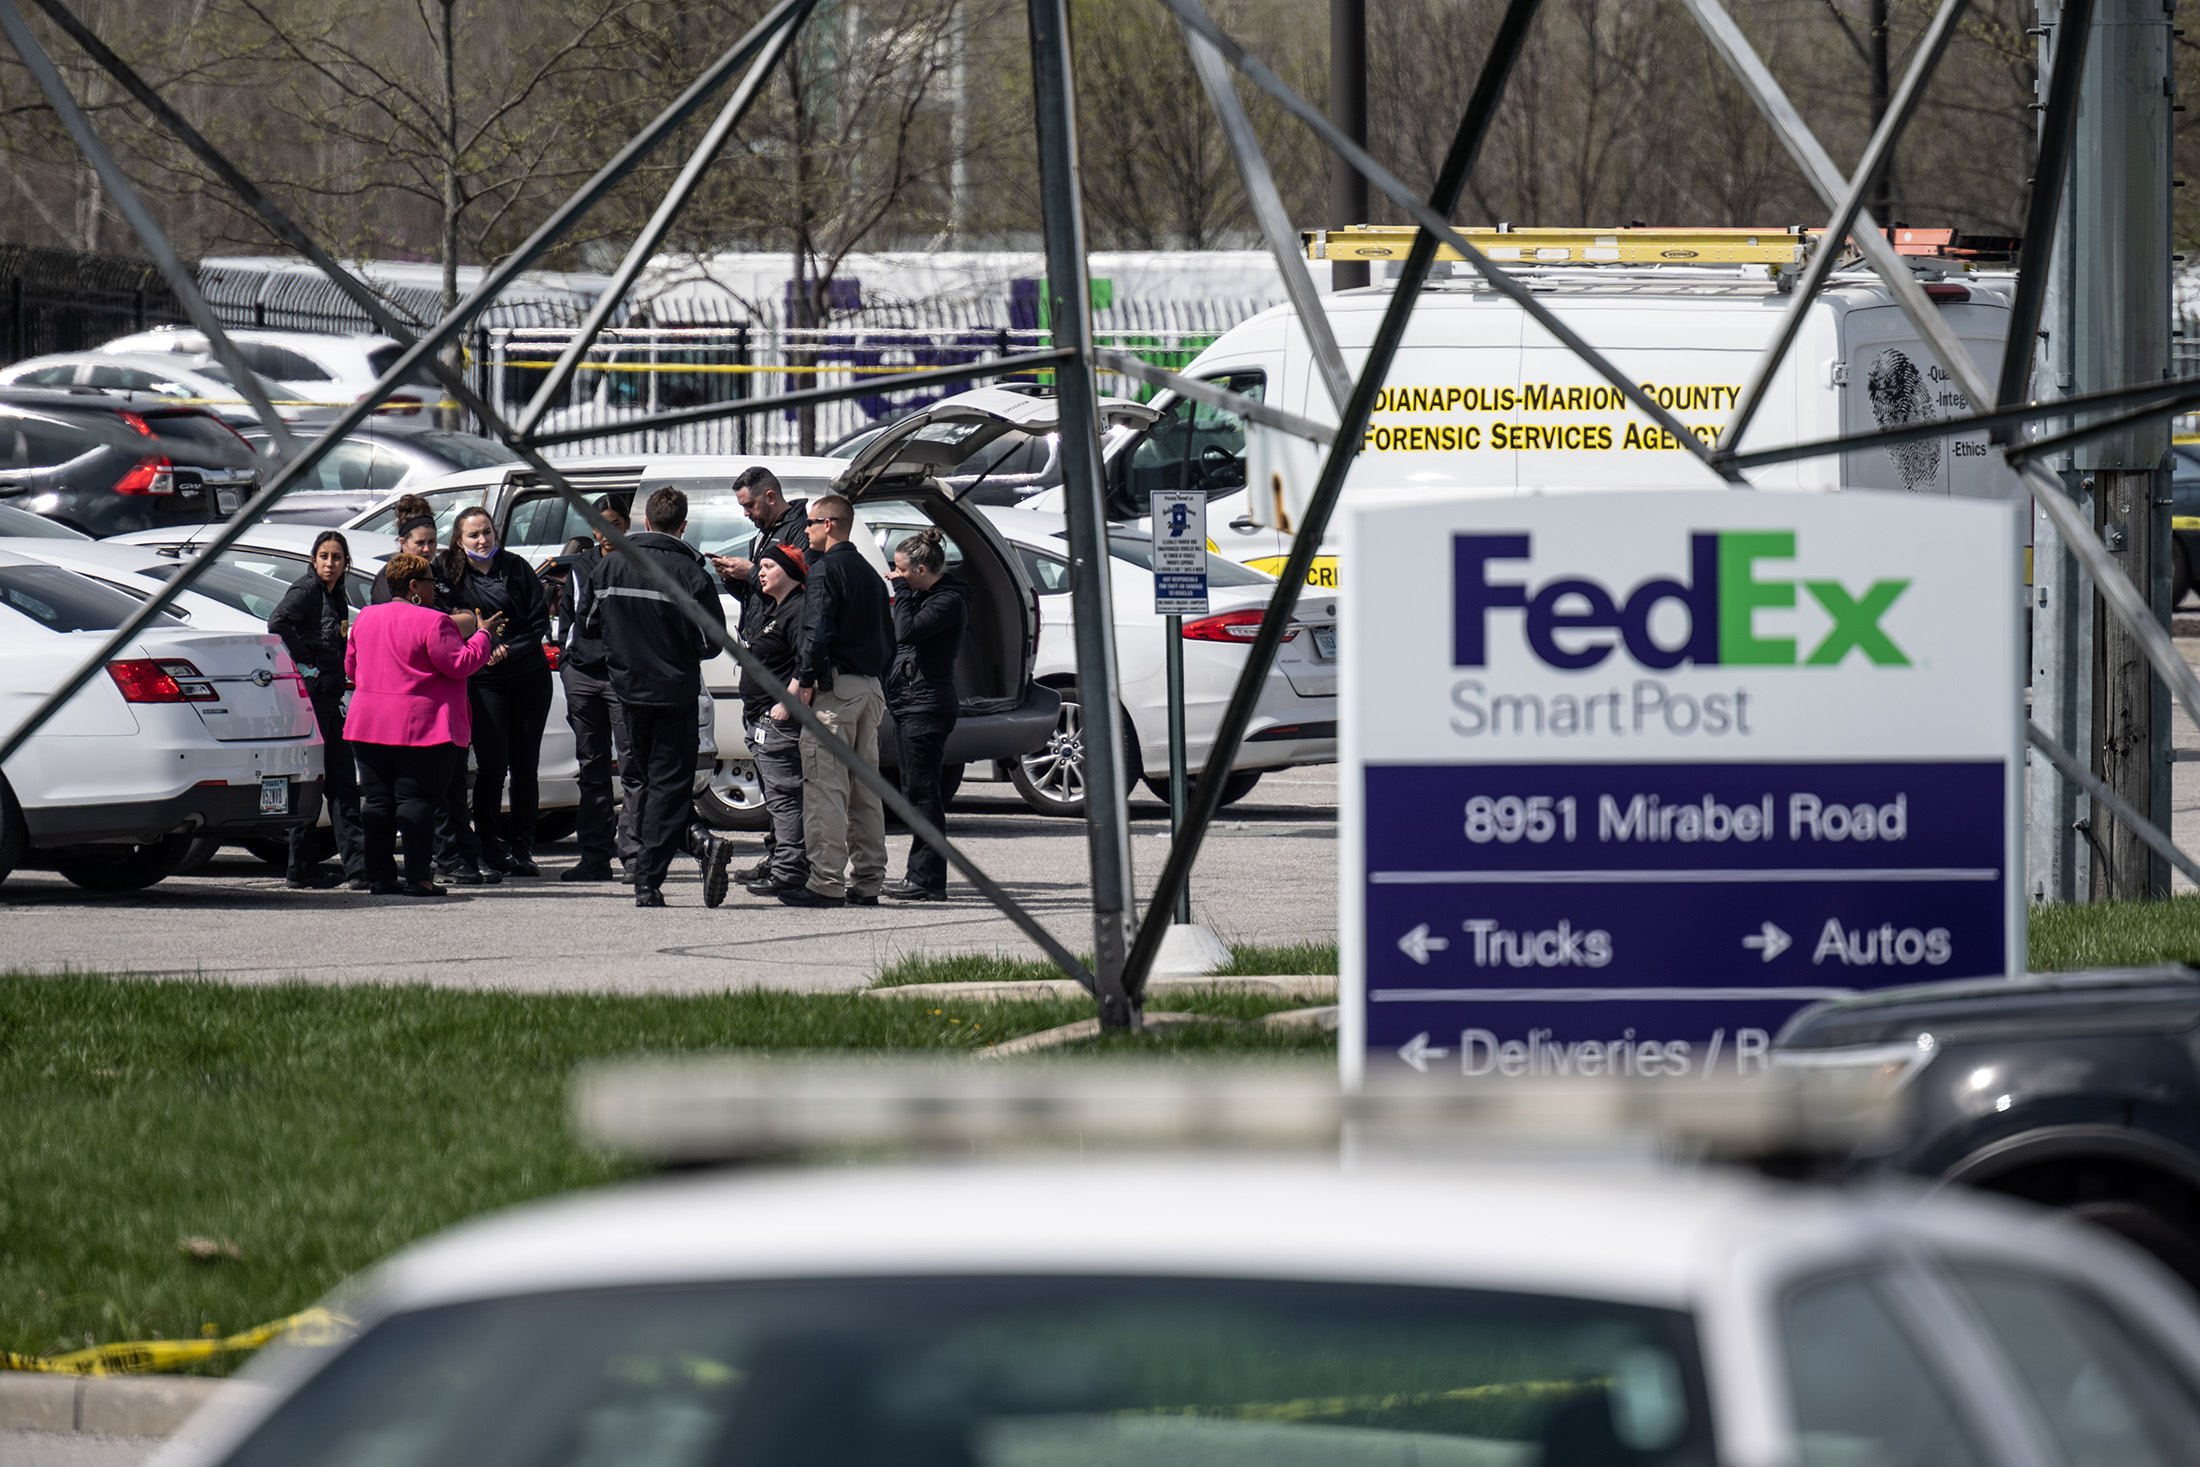 Crime scene investigators gather after a shooting at a FedEx SmartPost in Indianapolis on April 16.